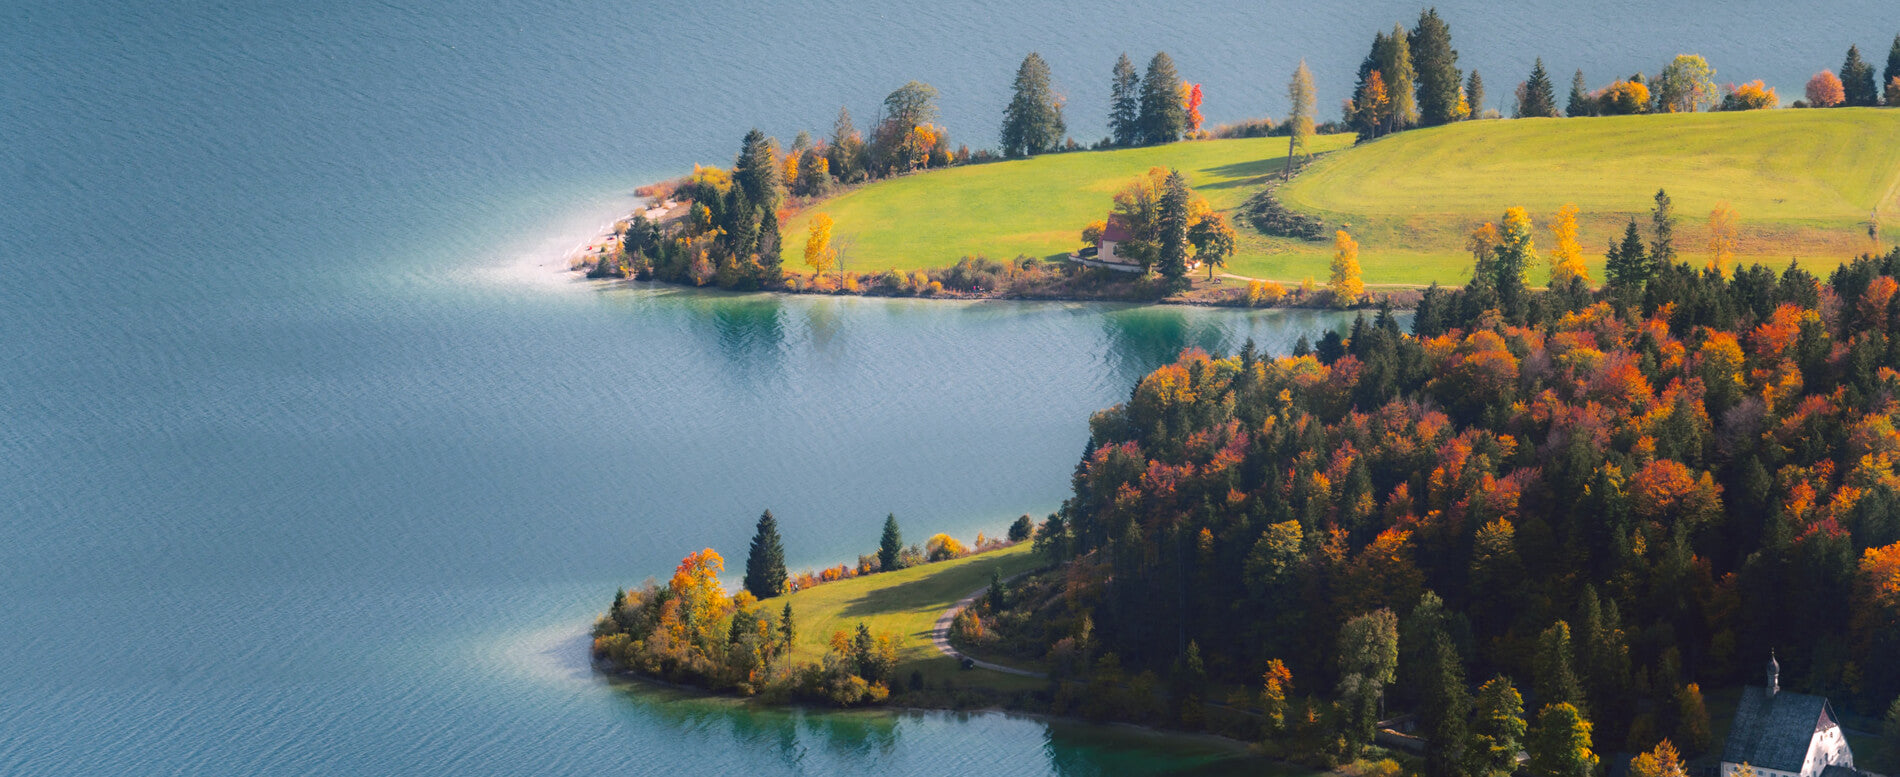 Aerial view of a lake in Germany